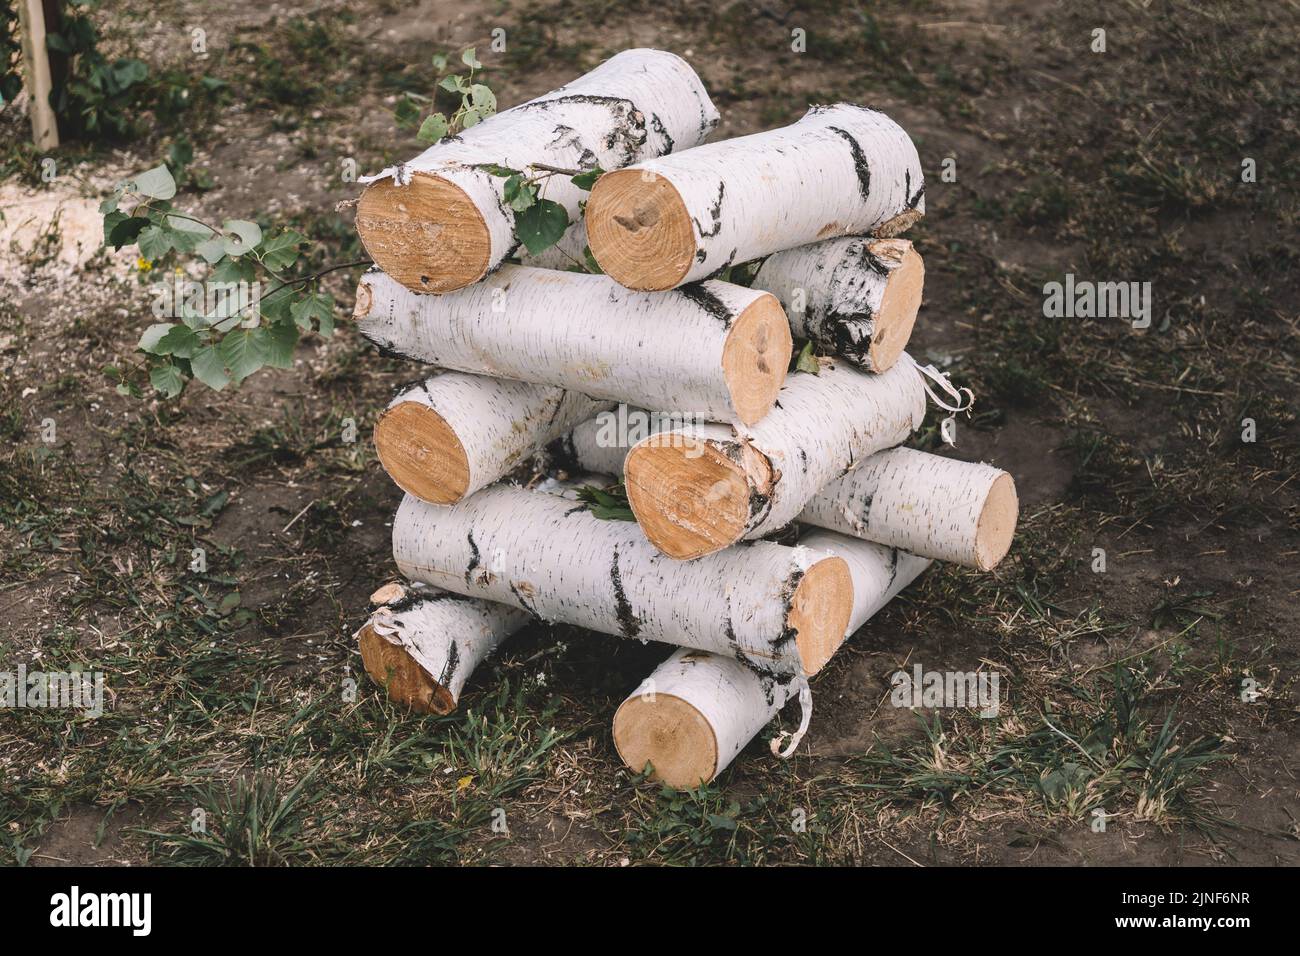 Thick birch logs close-up. Wood harvesting at the sawmill. A pile of birch wood is lying on the grass. Cutting firewood for heating the house. Stock Photo